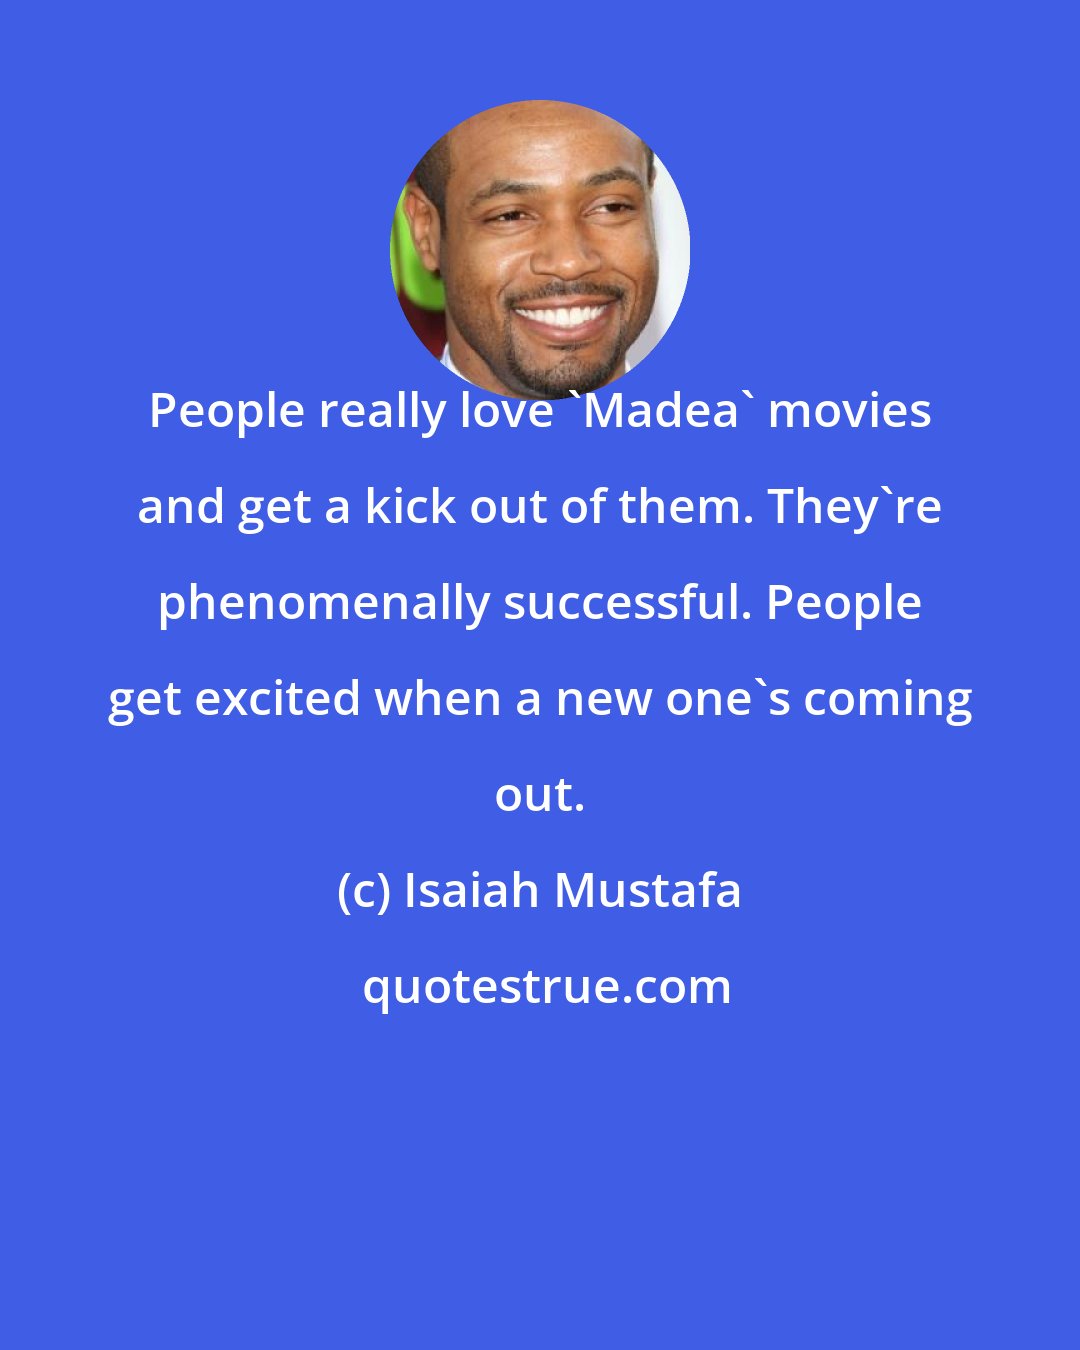 Isaiah Mustafa: People really love 'Madea' movies and get a kick out of them. They're phenomenally successful. People get excited when a new one's coming out.